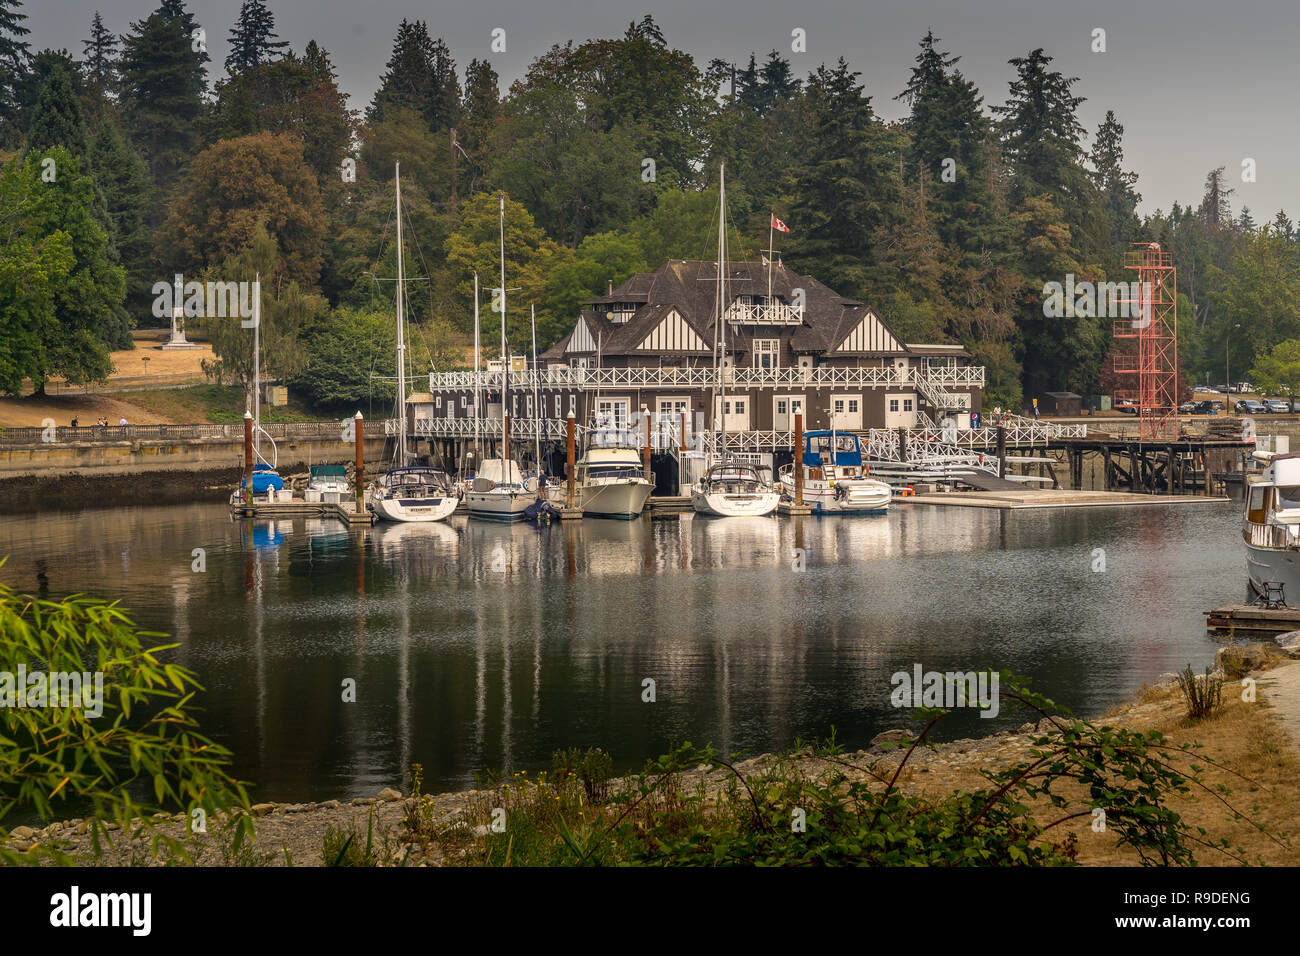 Vancouver, Canada - Aug 22, 2018. A Yacht club at Stanley Park, Vancouver Stock Photo